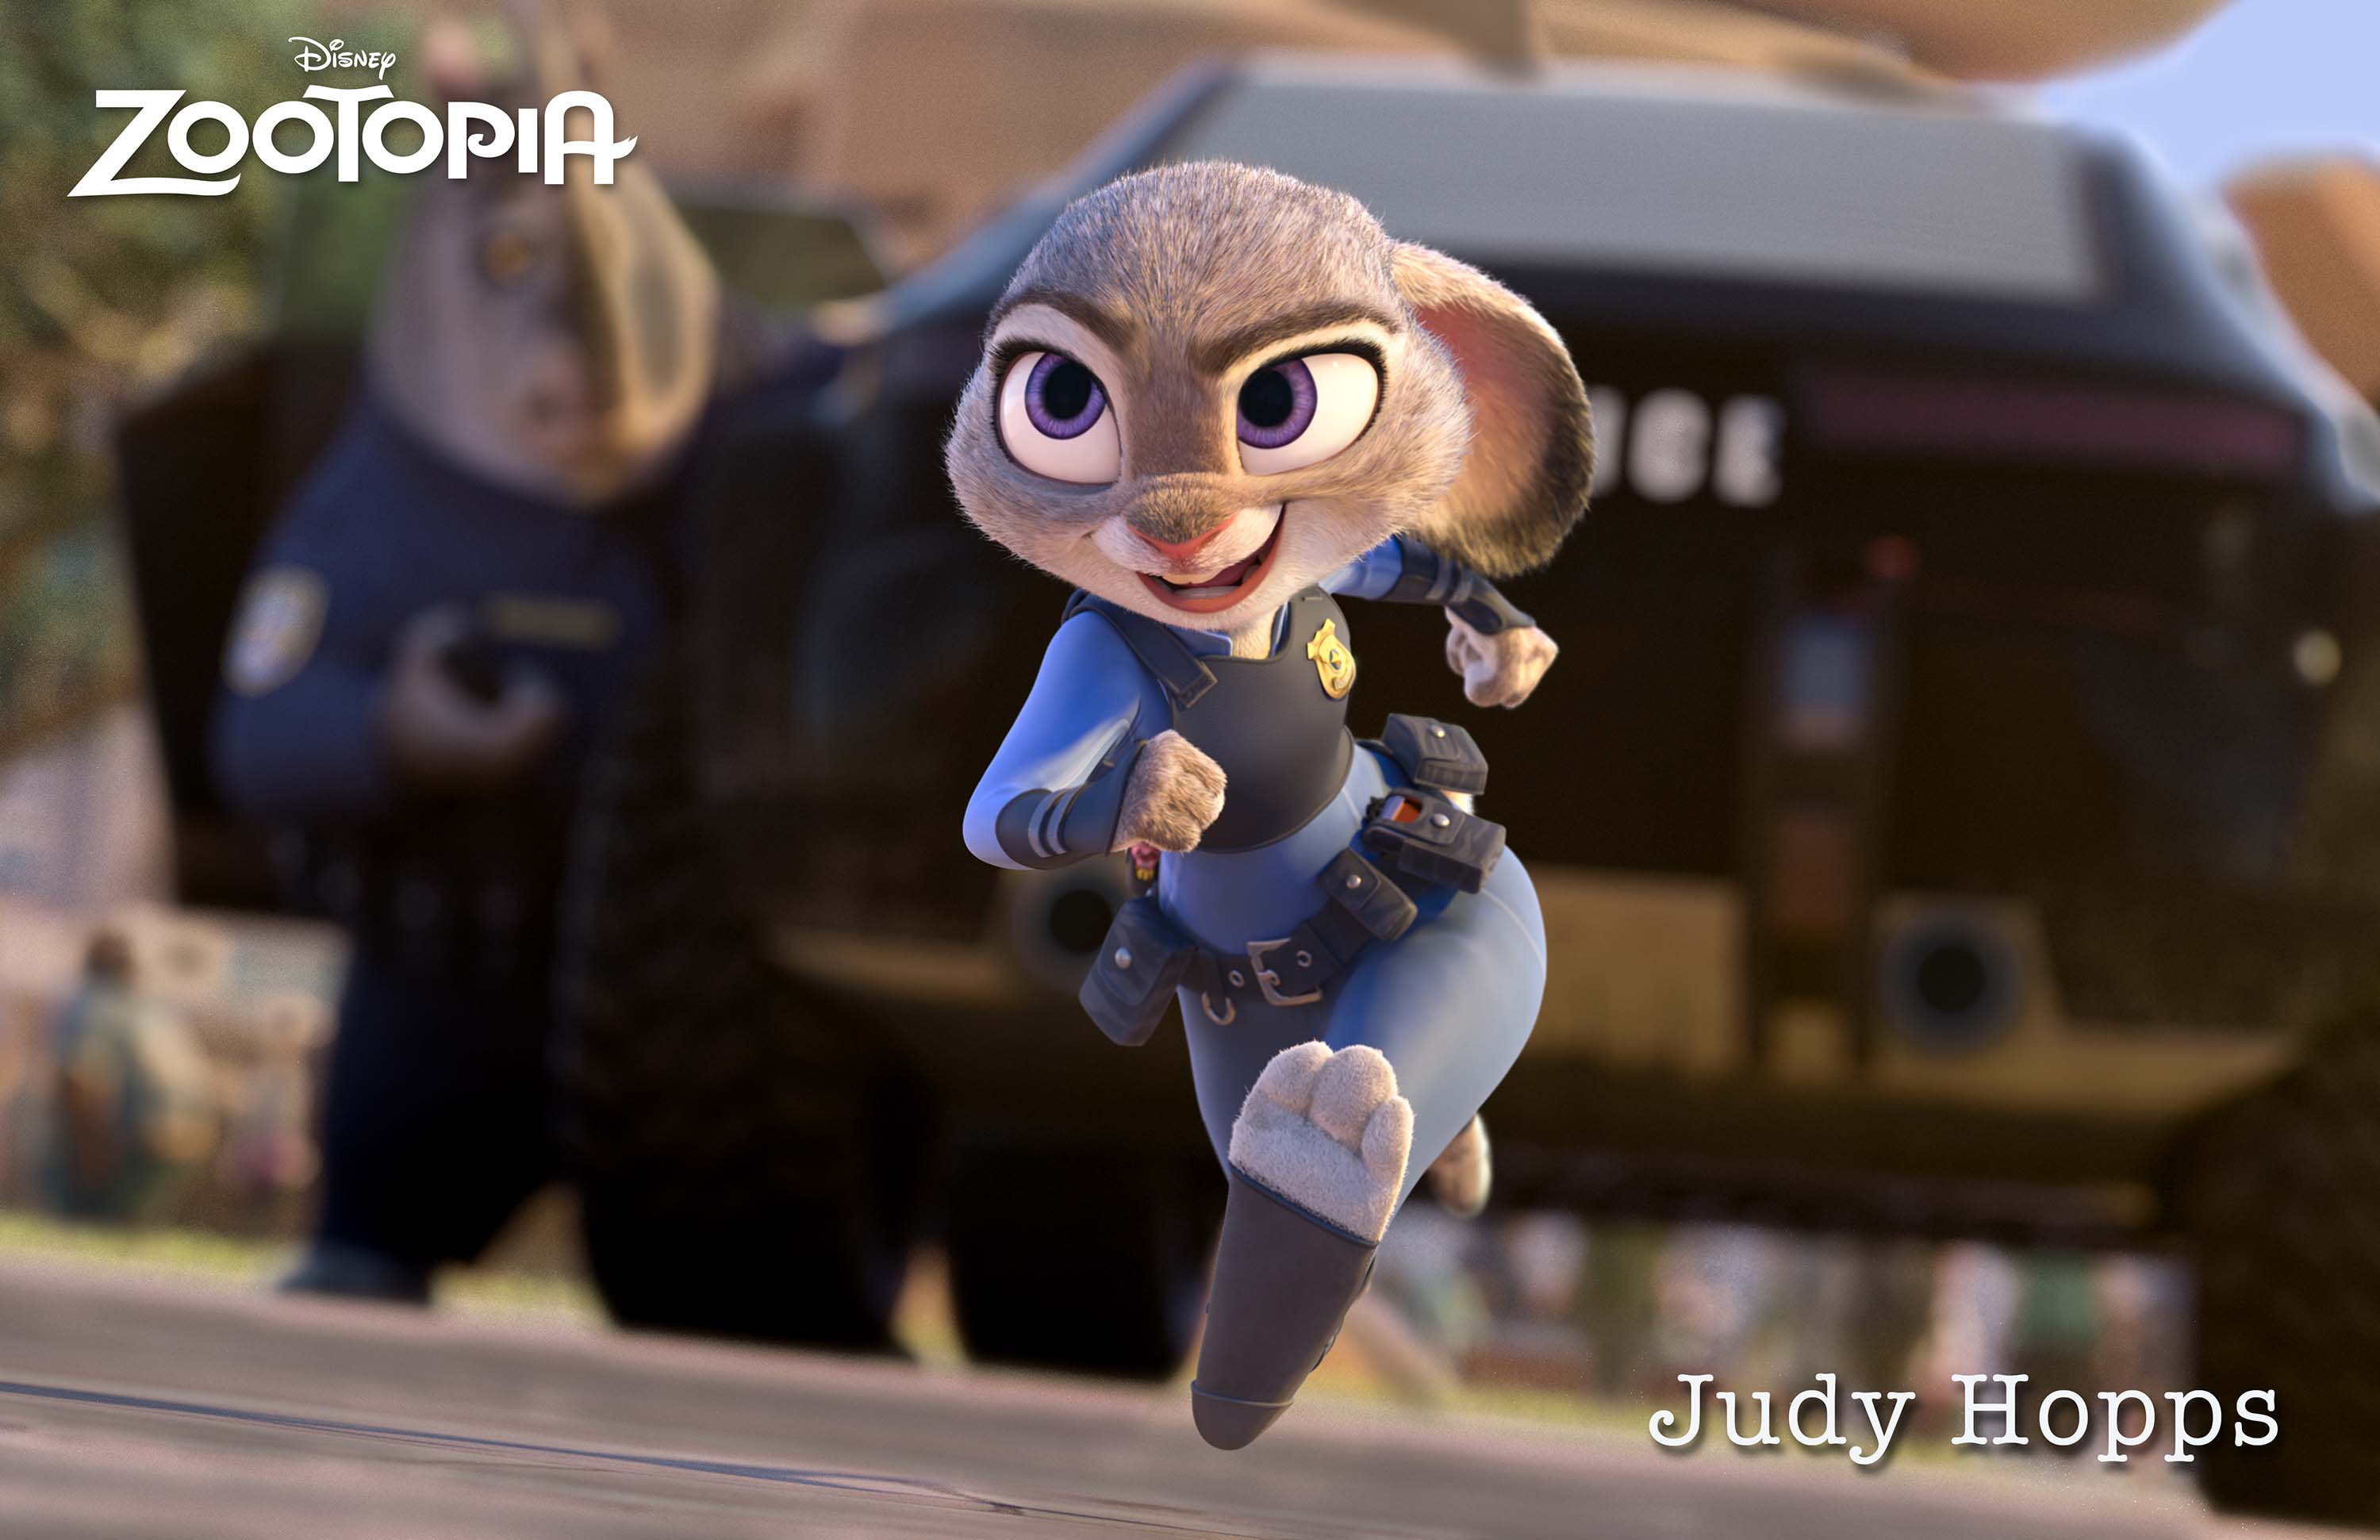 ZOOTOPIA â€“ JUDY HOPPS, an optimistic bunny who’s new to Zootopia’s police department. Â©2015 Disney. All Rights Reserved.